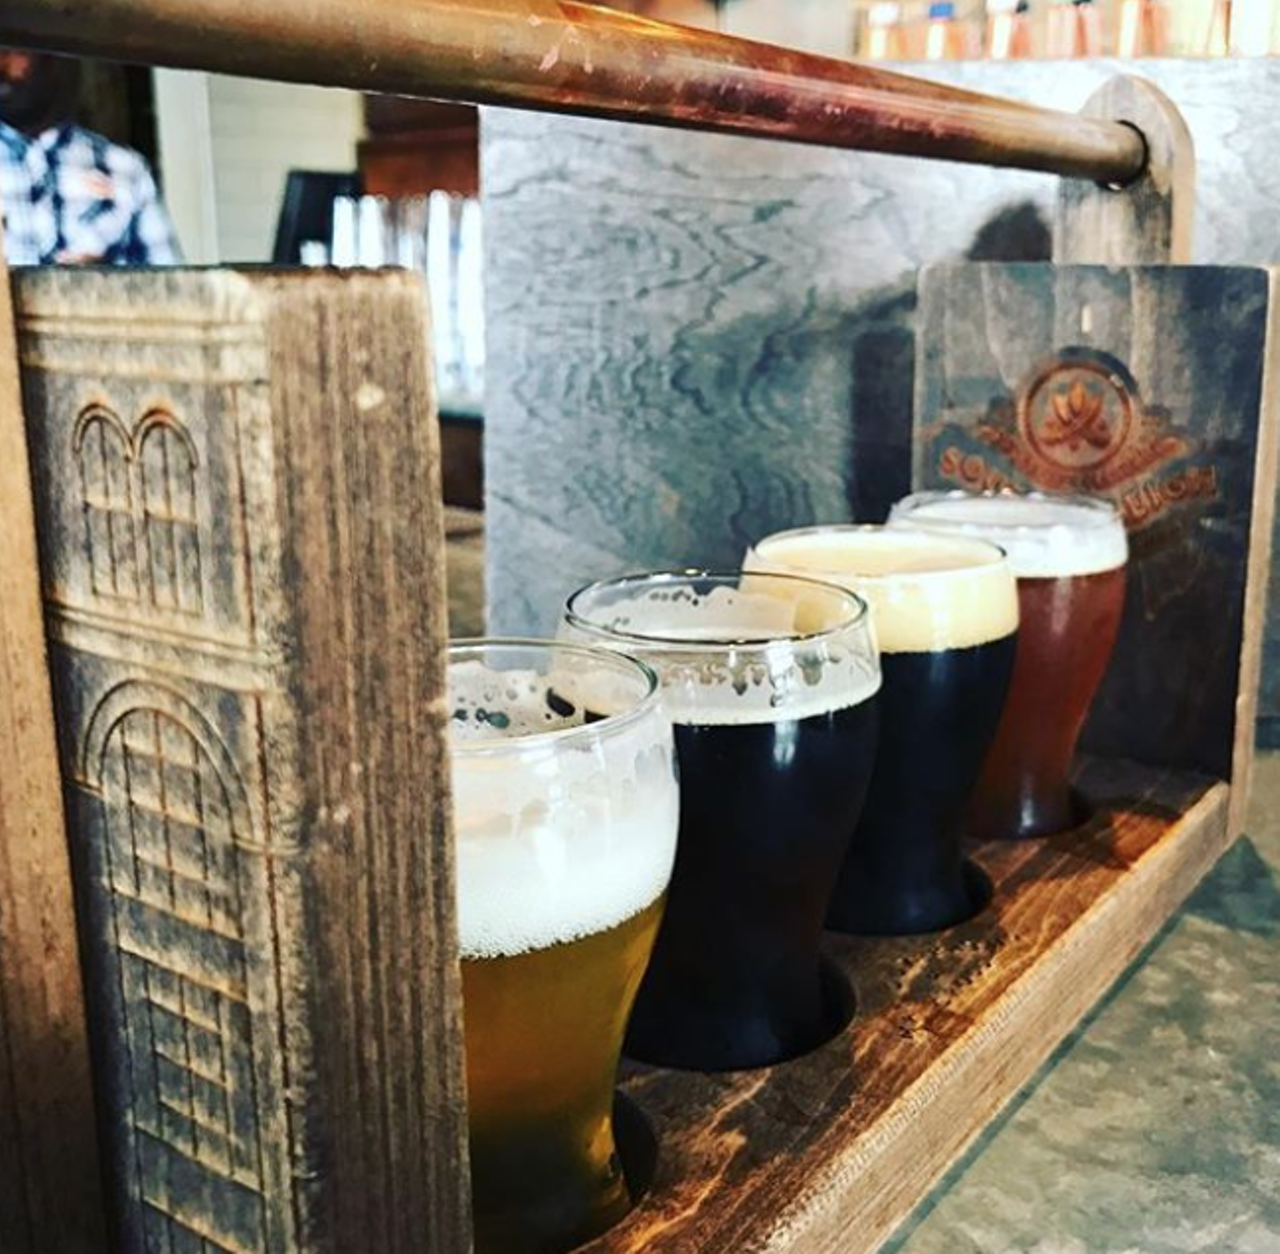 Les Locke and his crew keep producing an eclectic lineup. Try the margarita gose or pick up a sixer of Texas Uncommon Ale.
Photo via Instagram / craft_beer_bucket_list